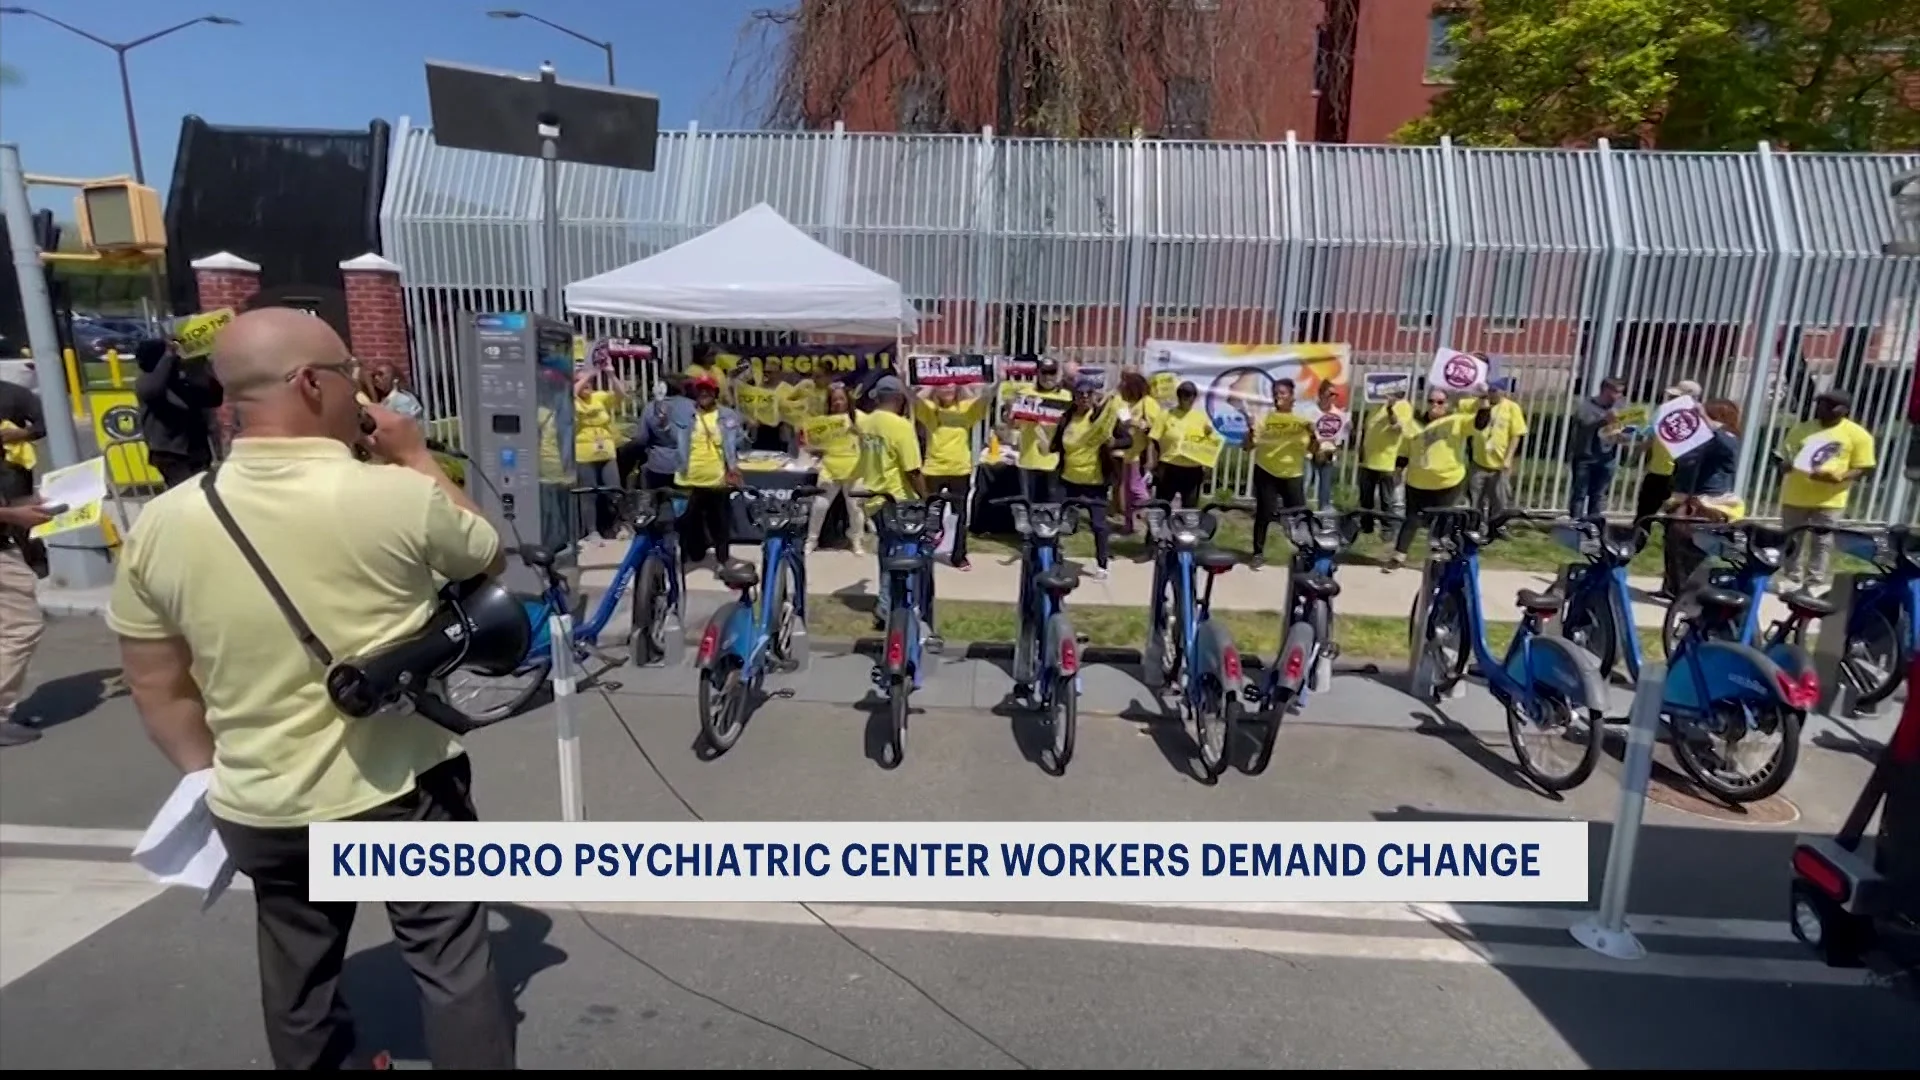 Kingsboro Psychiatric Center workers demand their bosses get fired due to bullying, nepotism